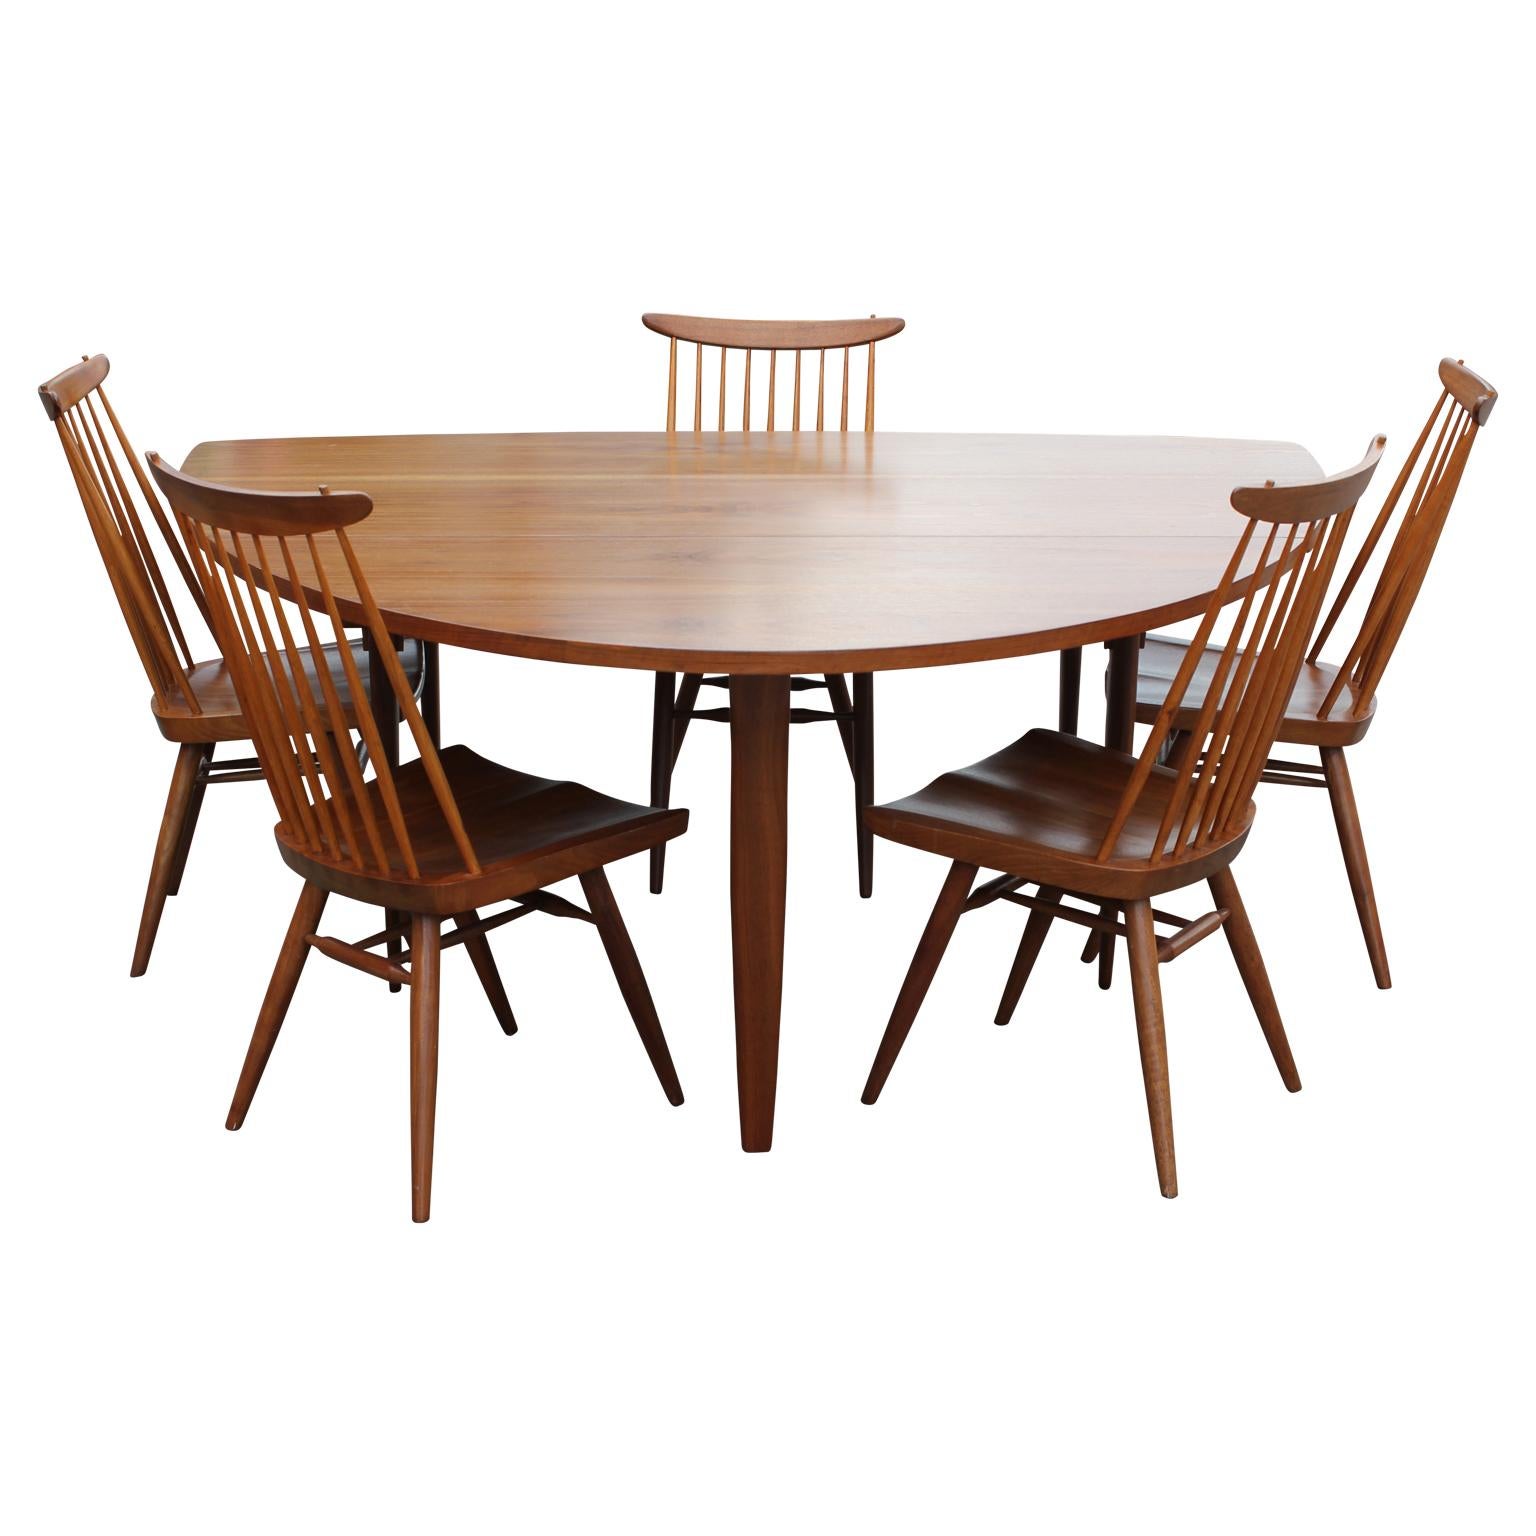 George Nakashima Model 793 Widdicomb Dining Table and New Chair Set of Five